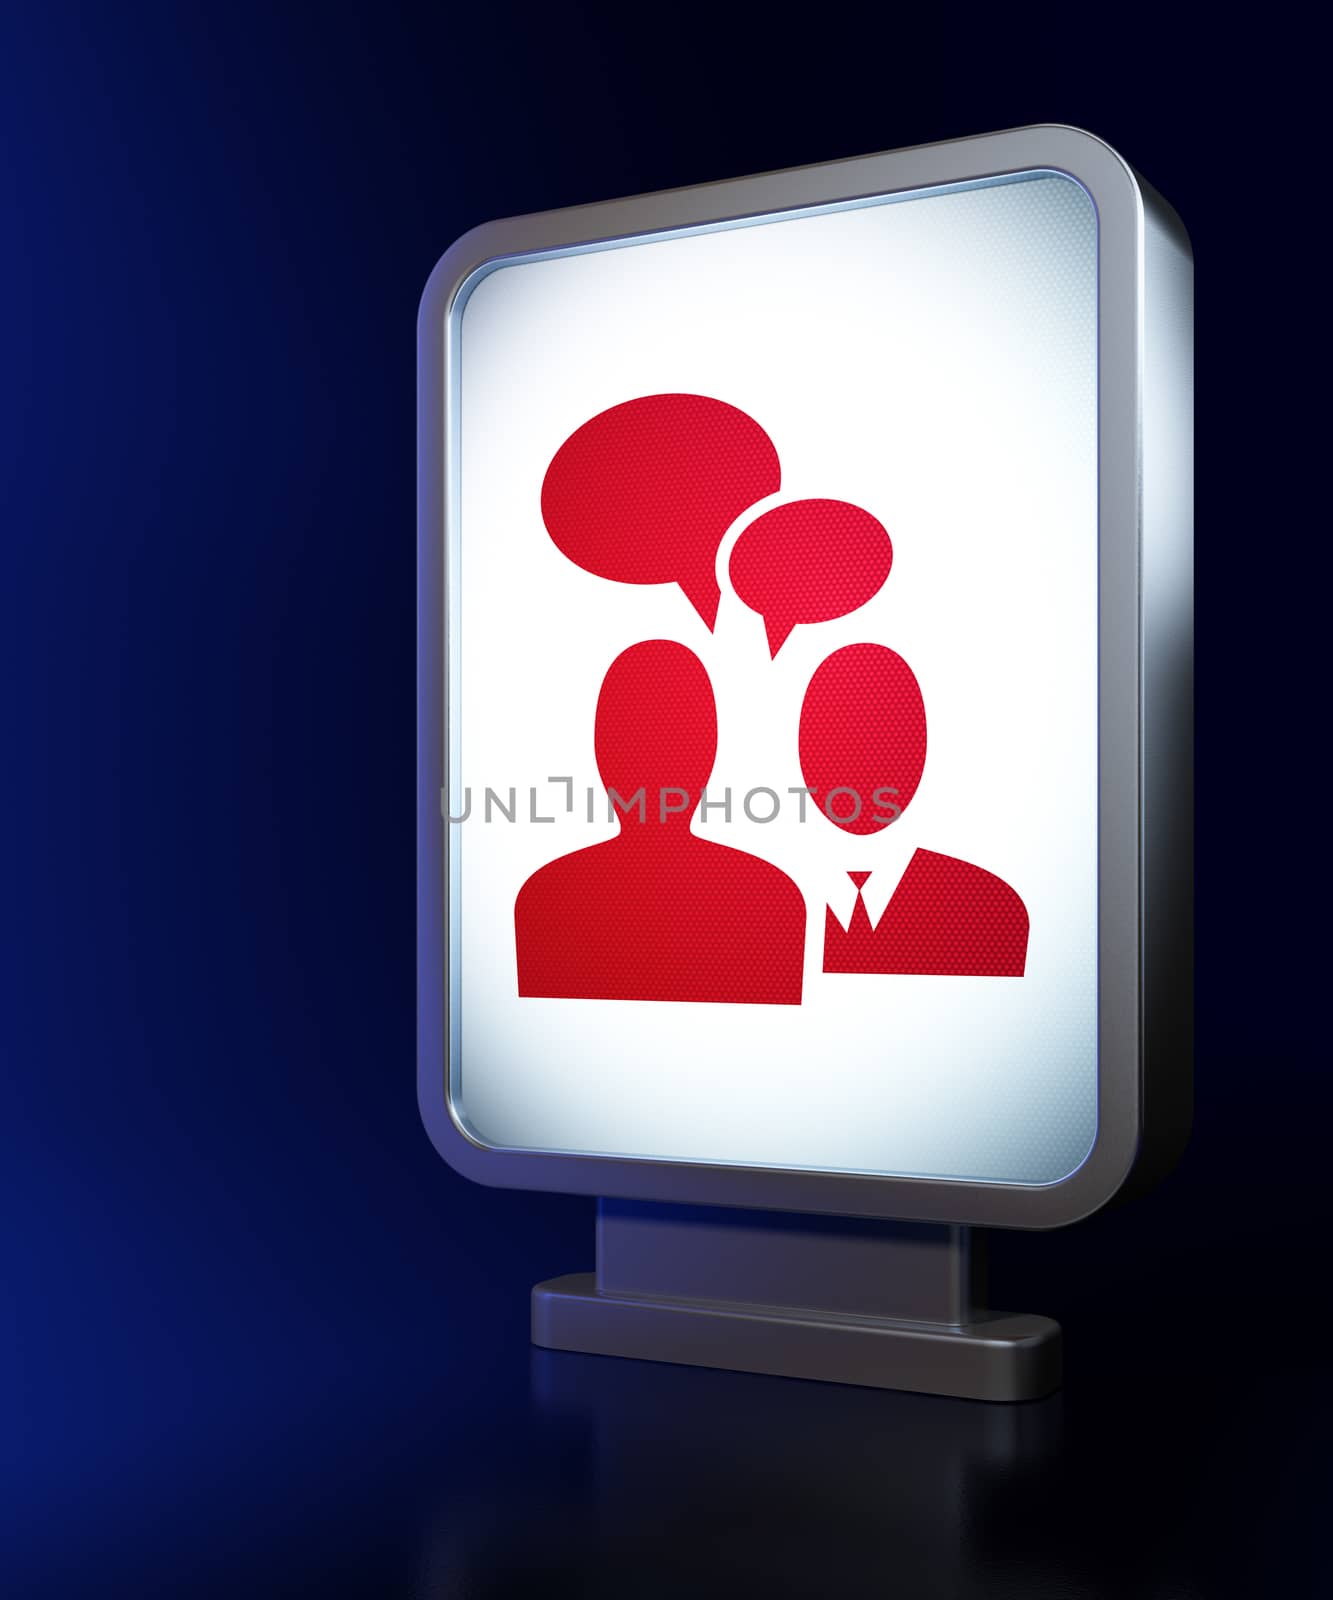 Business concept: Business Meeting on advertising billboard background, 3D rendering